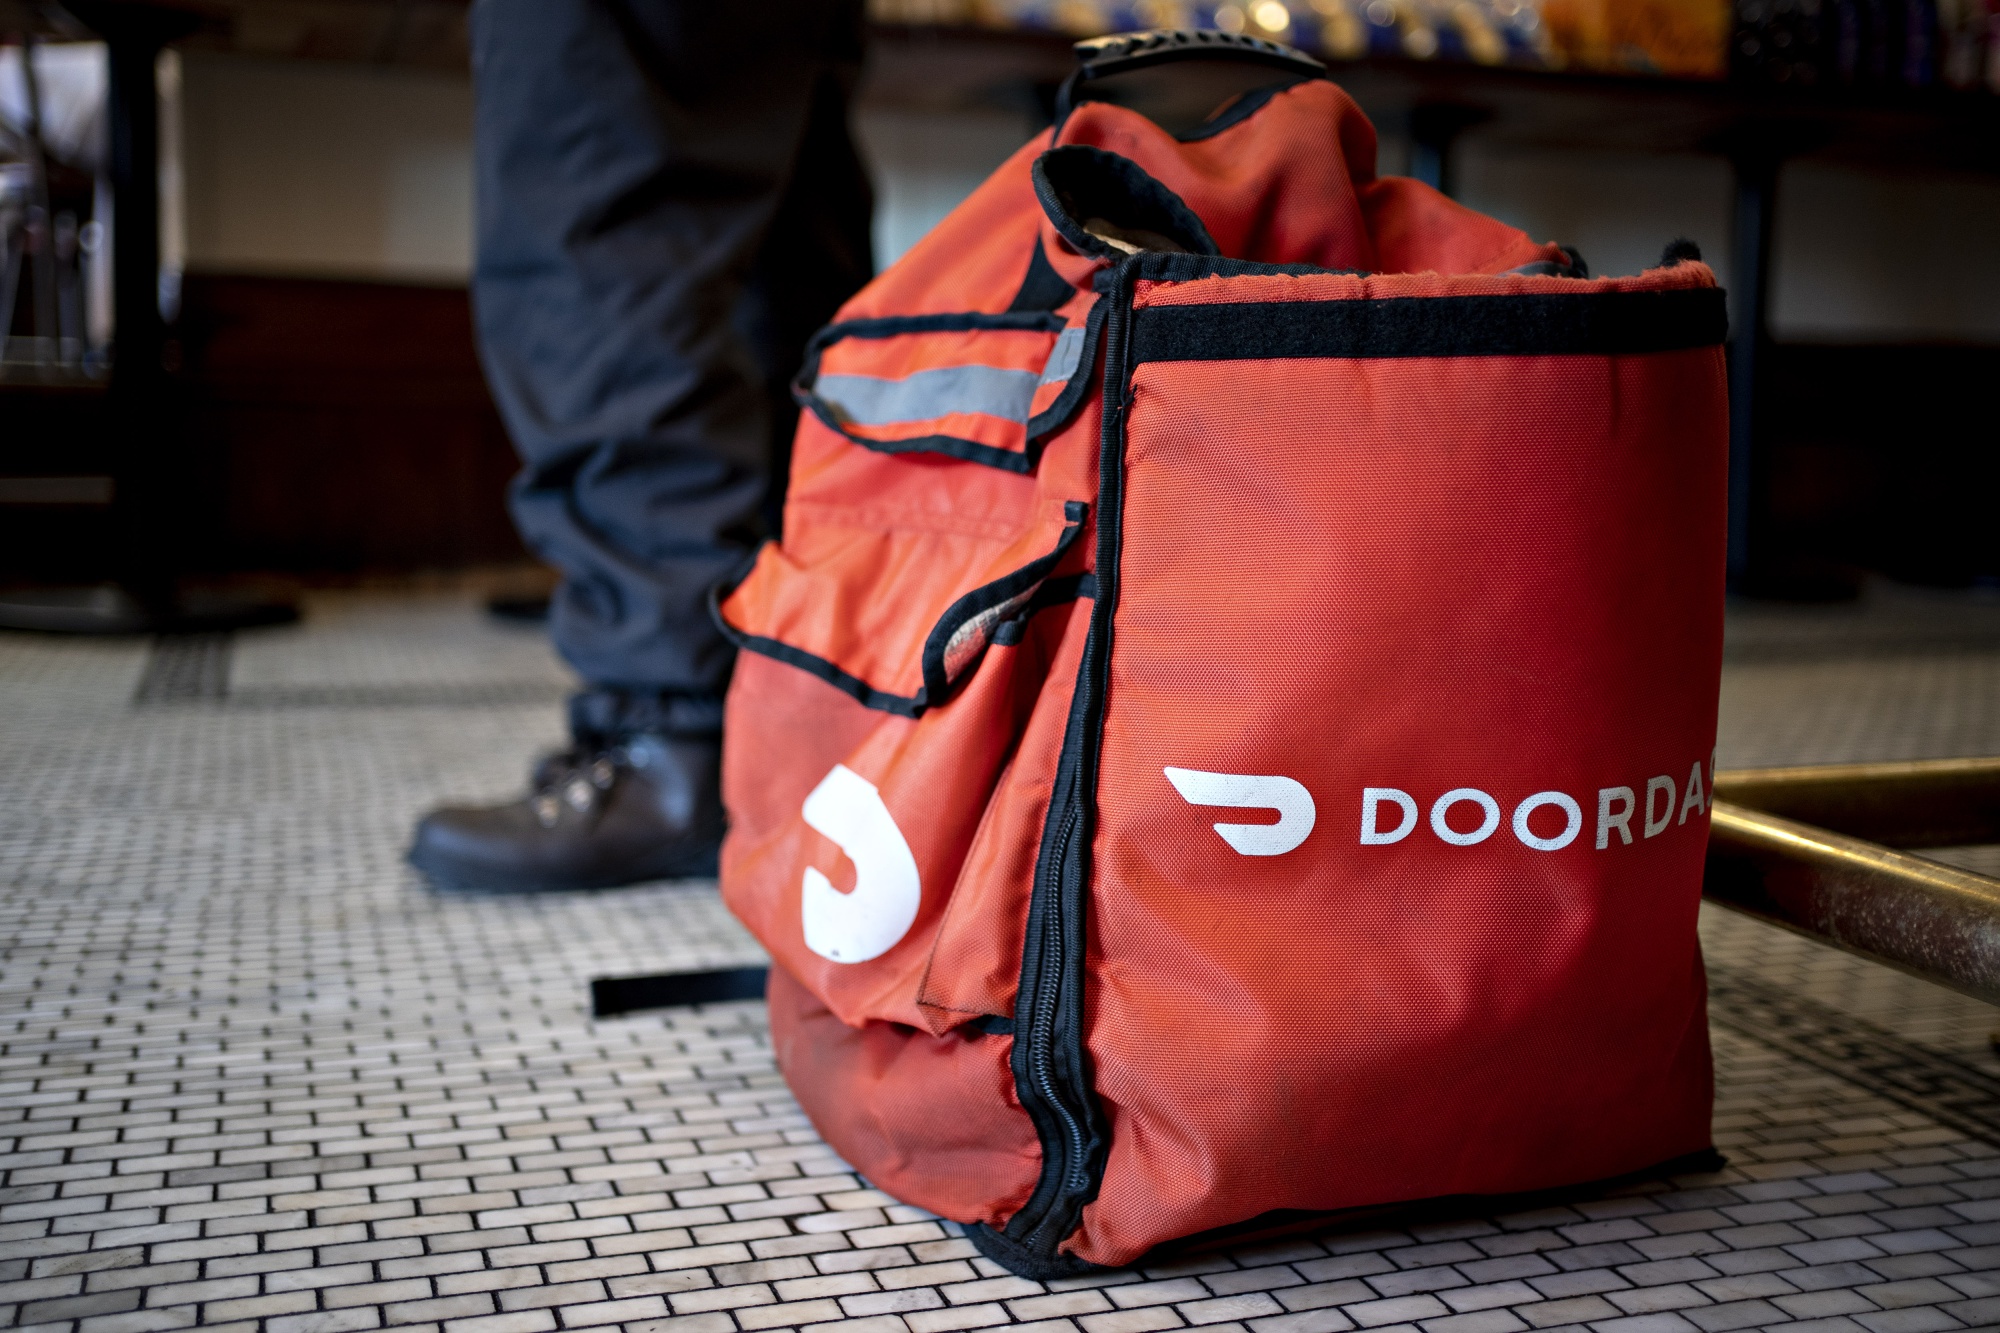 Can You Really Make Good Money with DoorDash? Drivers Share What They Earn